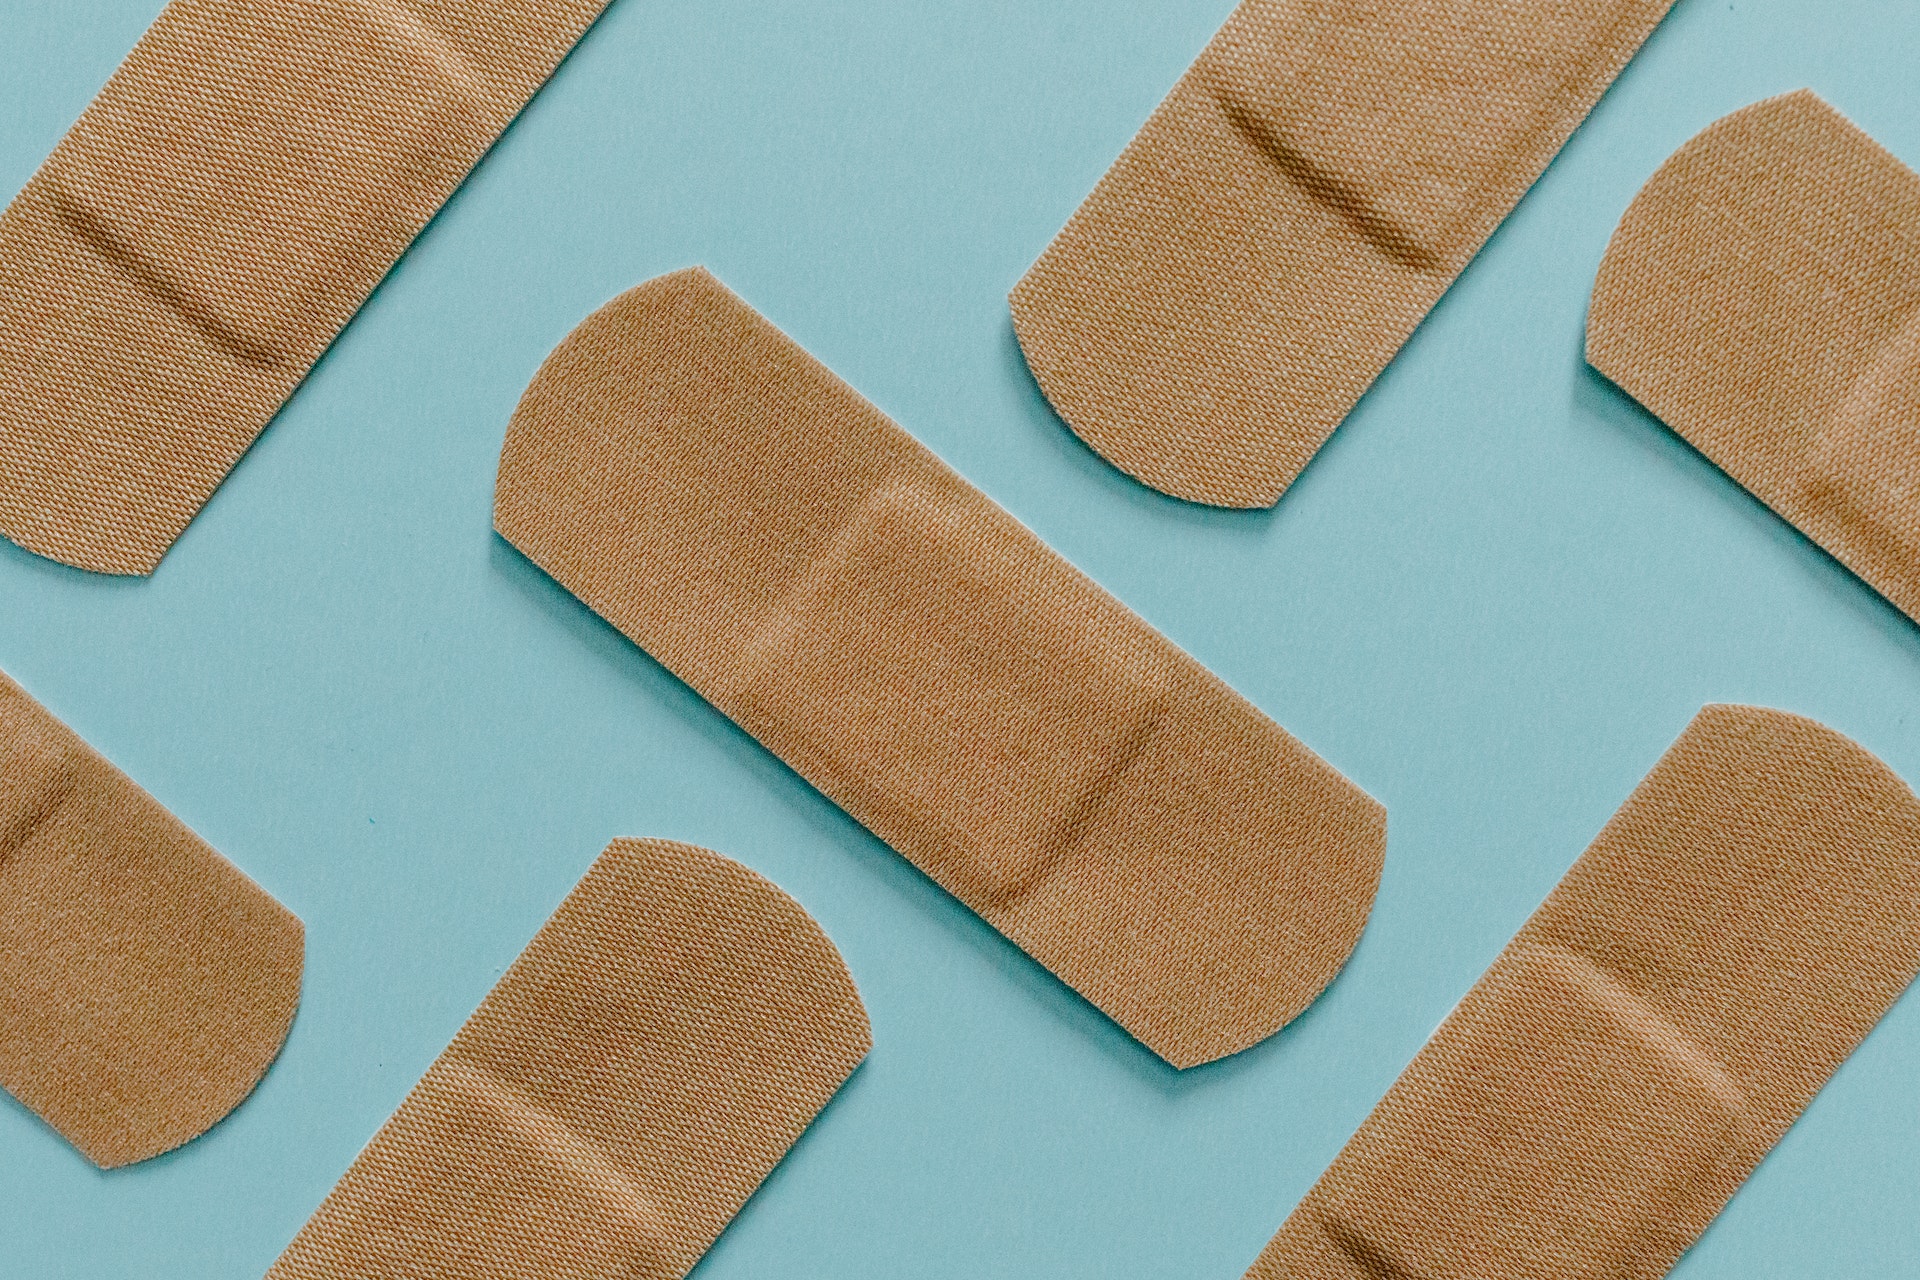 The Dangers of the Band-Aid Approach on Your Hormones